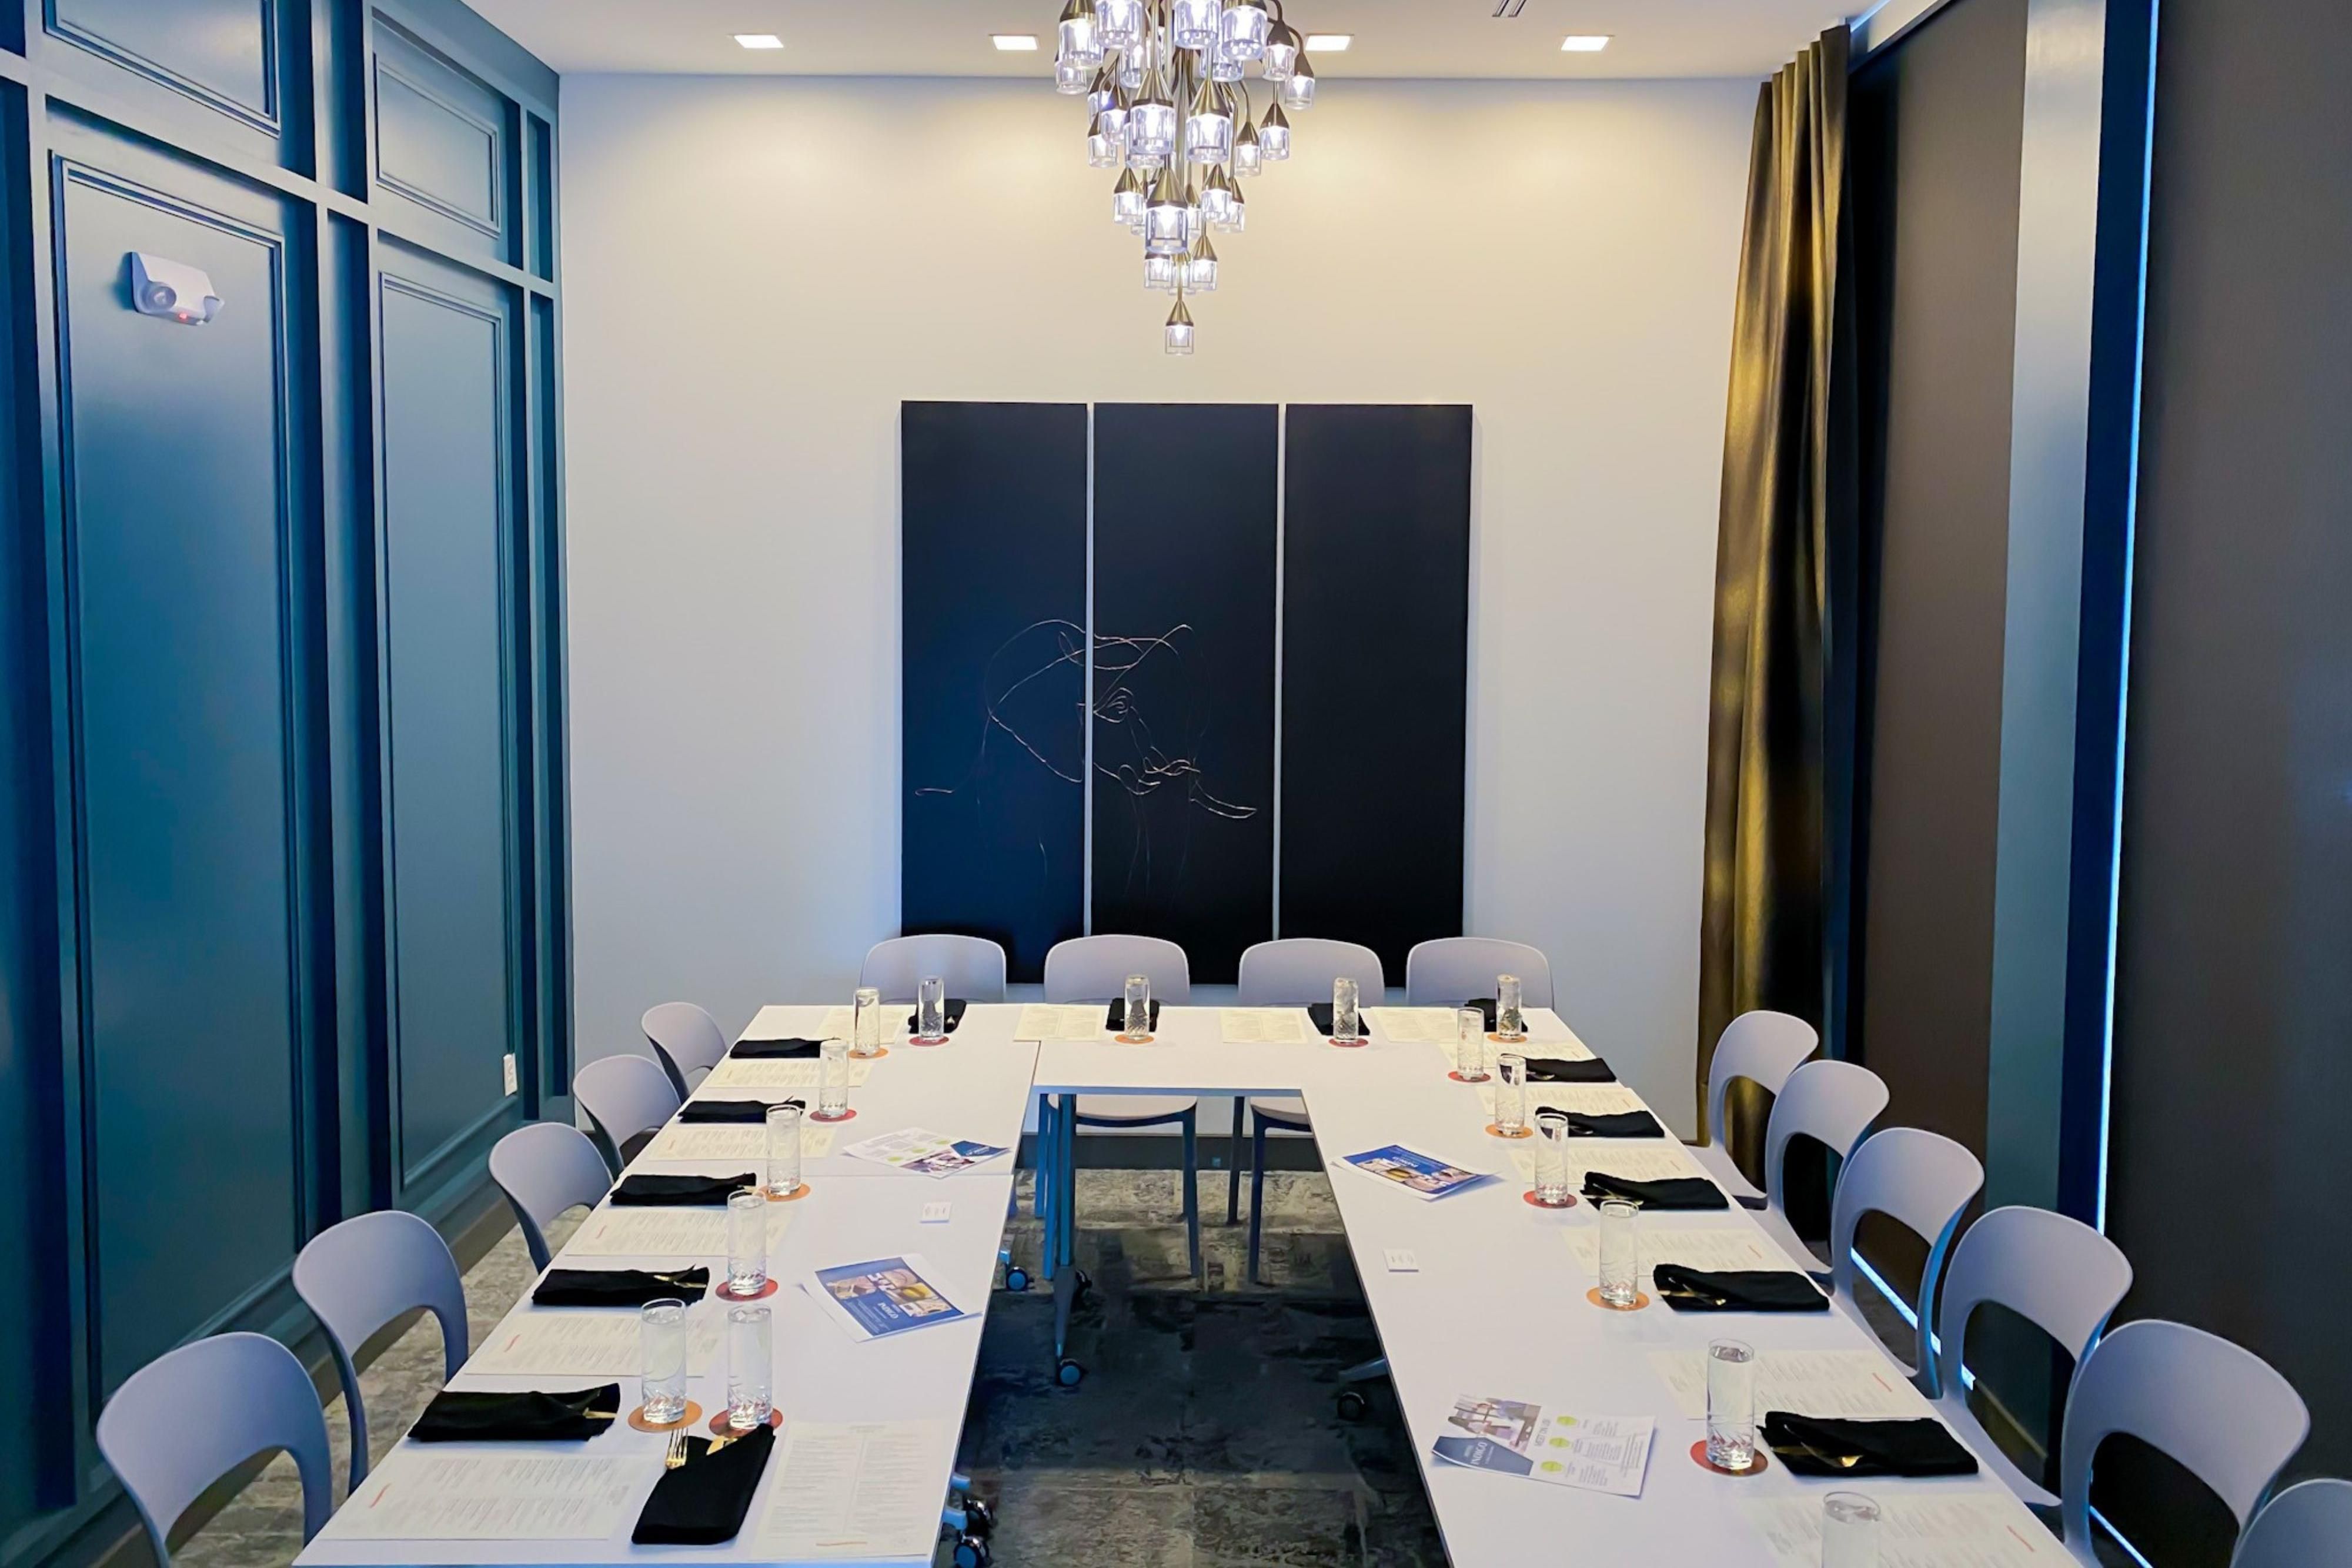 Plan your next event in more than 2,000 sq ft of stylish meeting space in downtown St. Louis. Host social gatherings, conferences, business meetings, seminars, family reunions, micro weddings, & parties in our two venues & rooftop overlooking the city. We also offer spacious rooms & suites for groups, private dining space, & catering services.